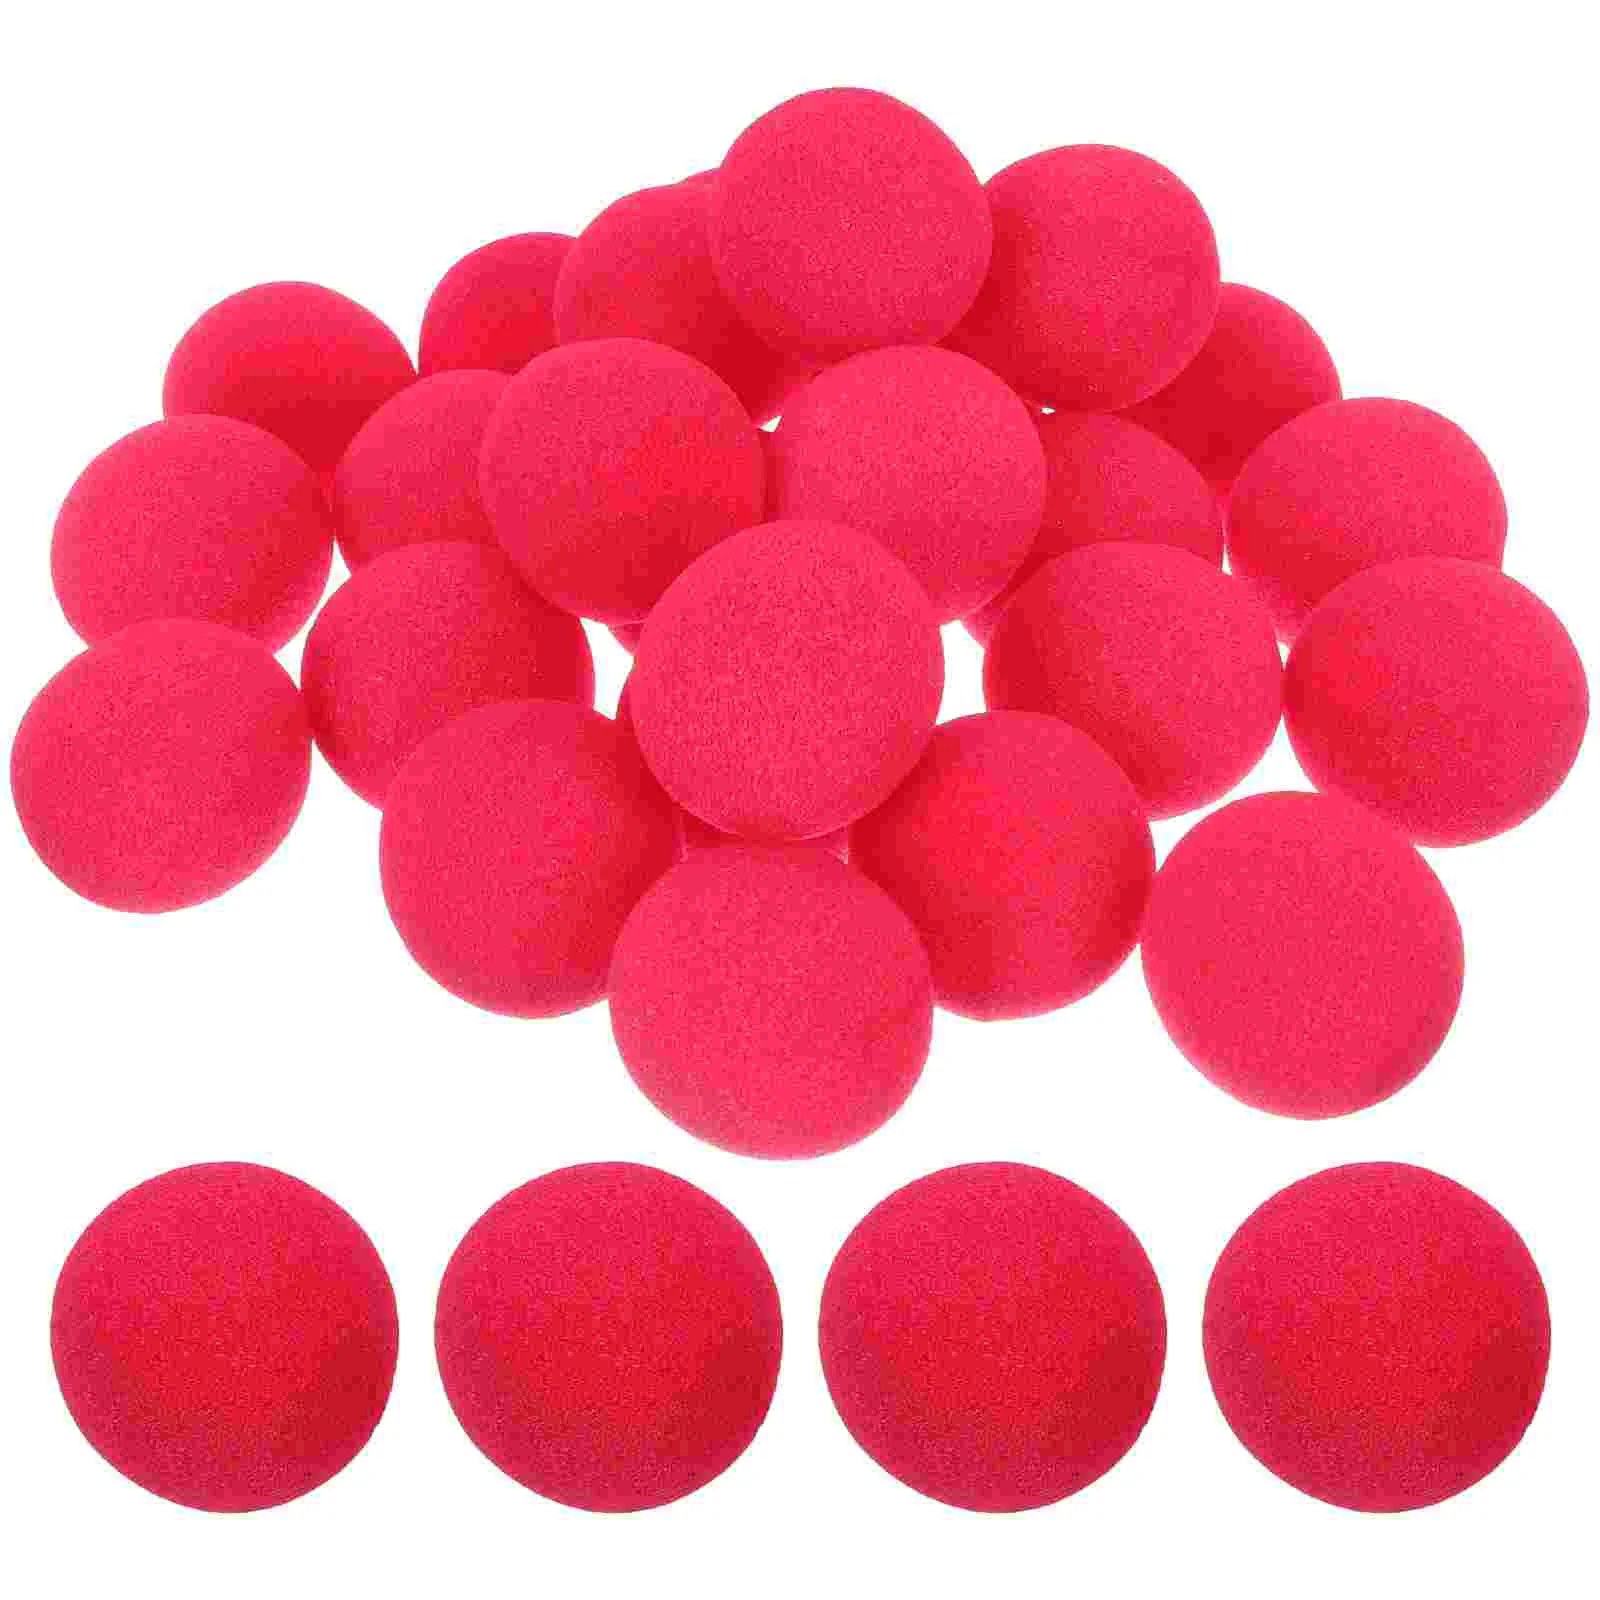 

25 Pcs Foam Sponge Nose Decorative Circus Noses Small Clown Prop Cosplay Plaything Carnival Accessory Party